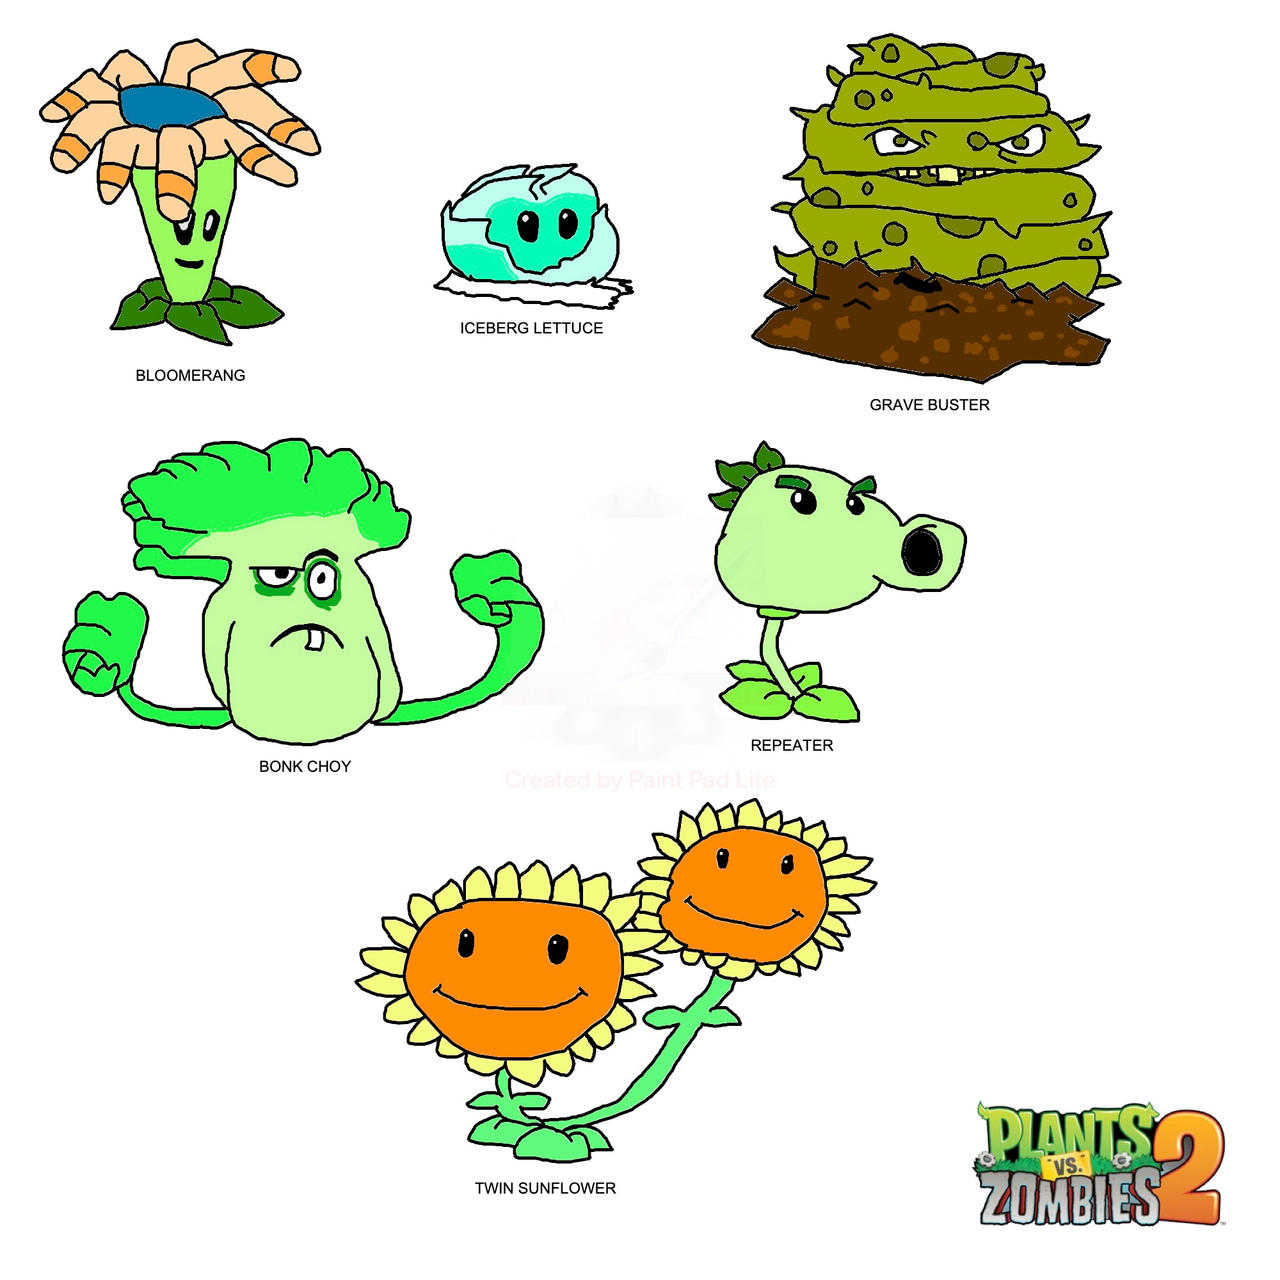 All New Plants in Plants vs Zombies 2 2022 